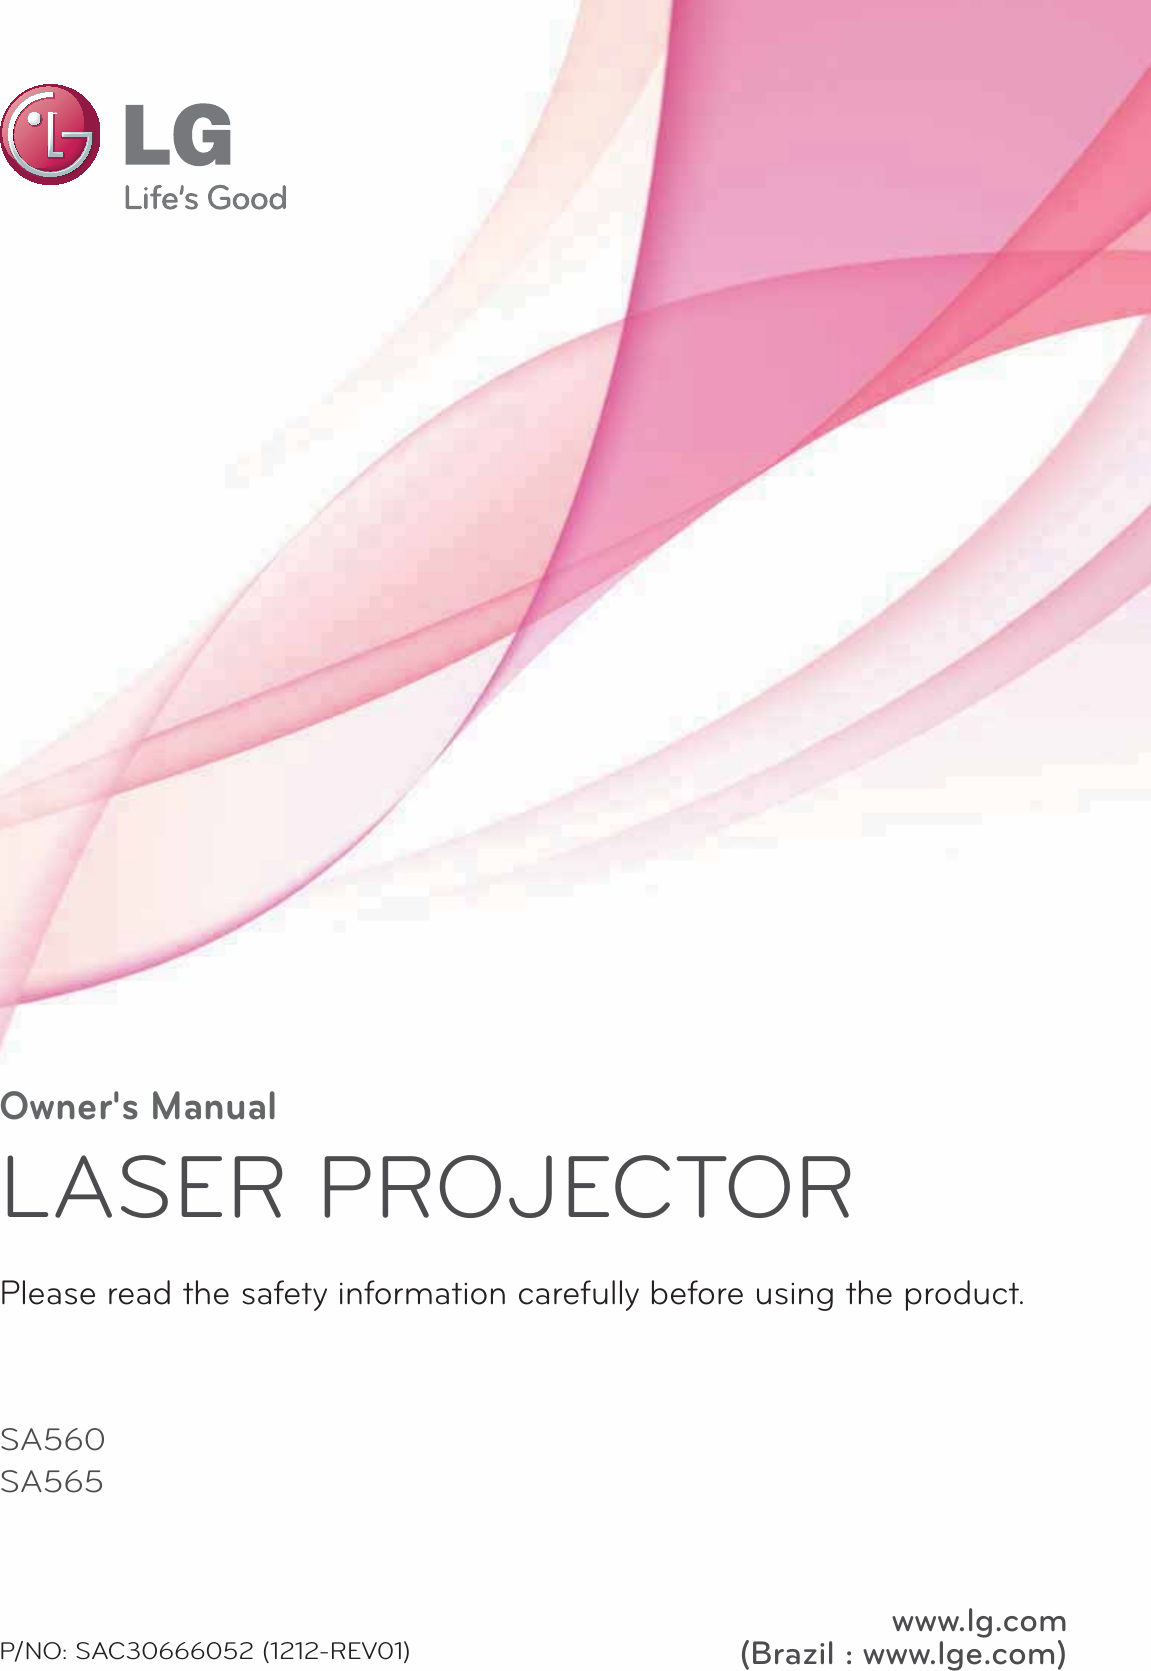 Owner&apos;s ManualLASER PROJECTORSA560SA565Please read the safety information carefully before using the product.www.lg.com(Brazil : www.lge.com)P/NO: SAC30666052 (1212-REV01)